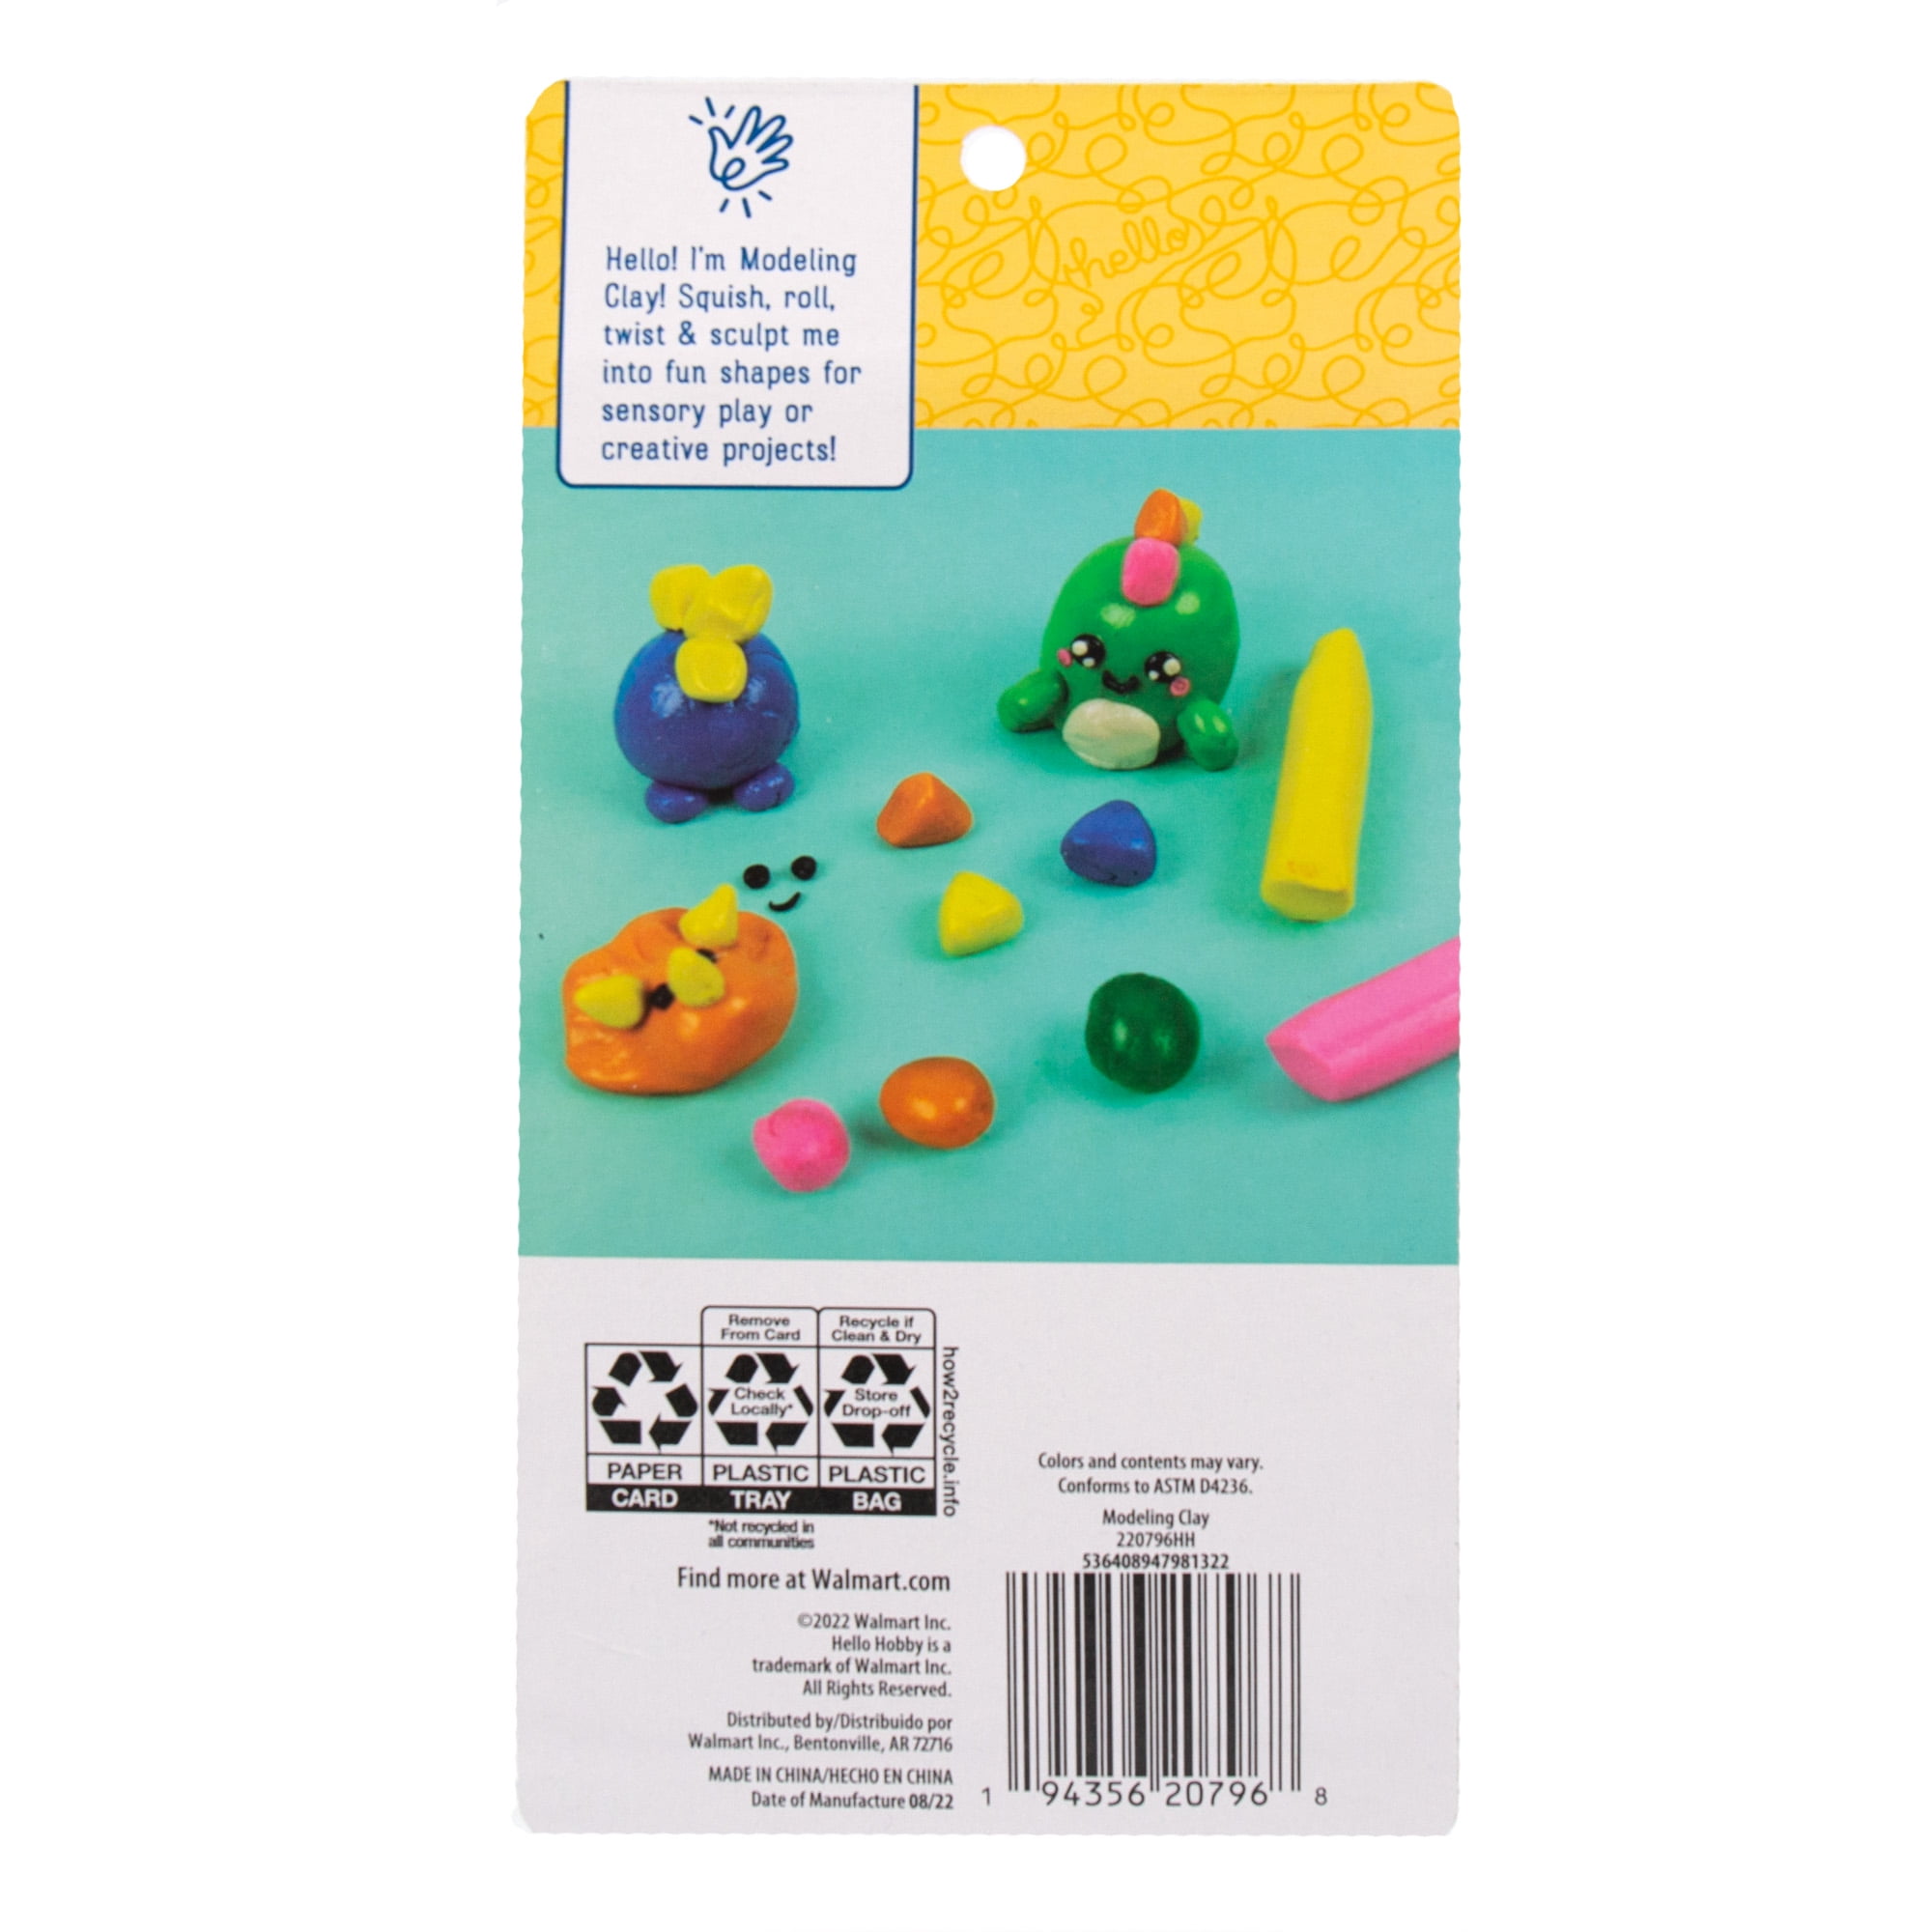 Pepy Plastilina Reusable and Non-Drying Modeling Clay; Set of 24